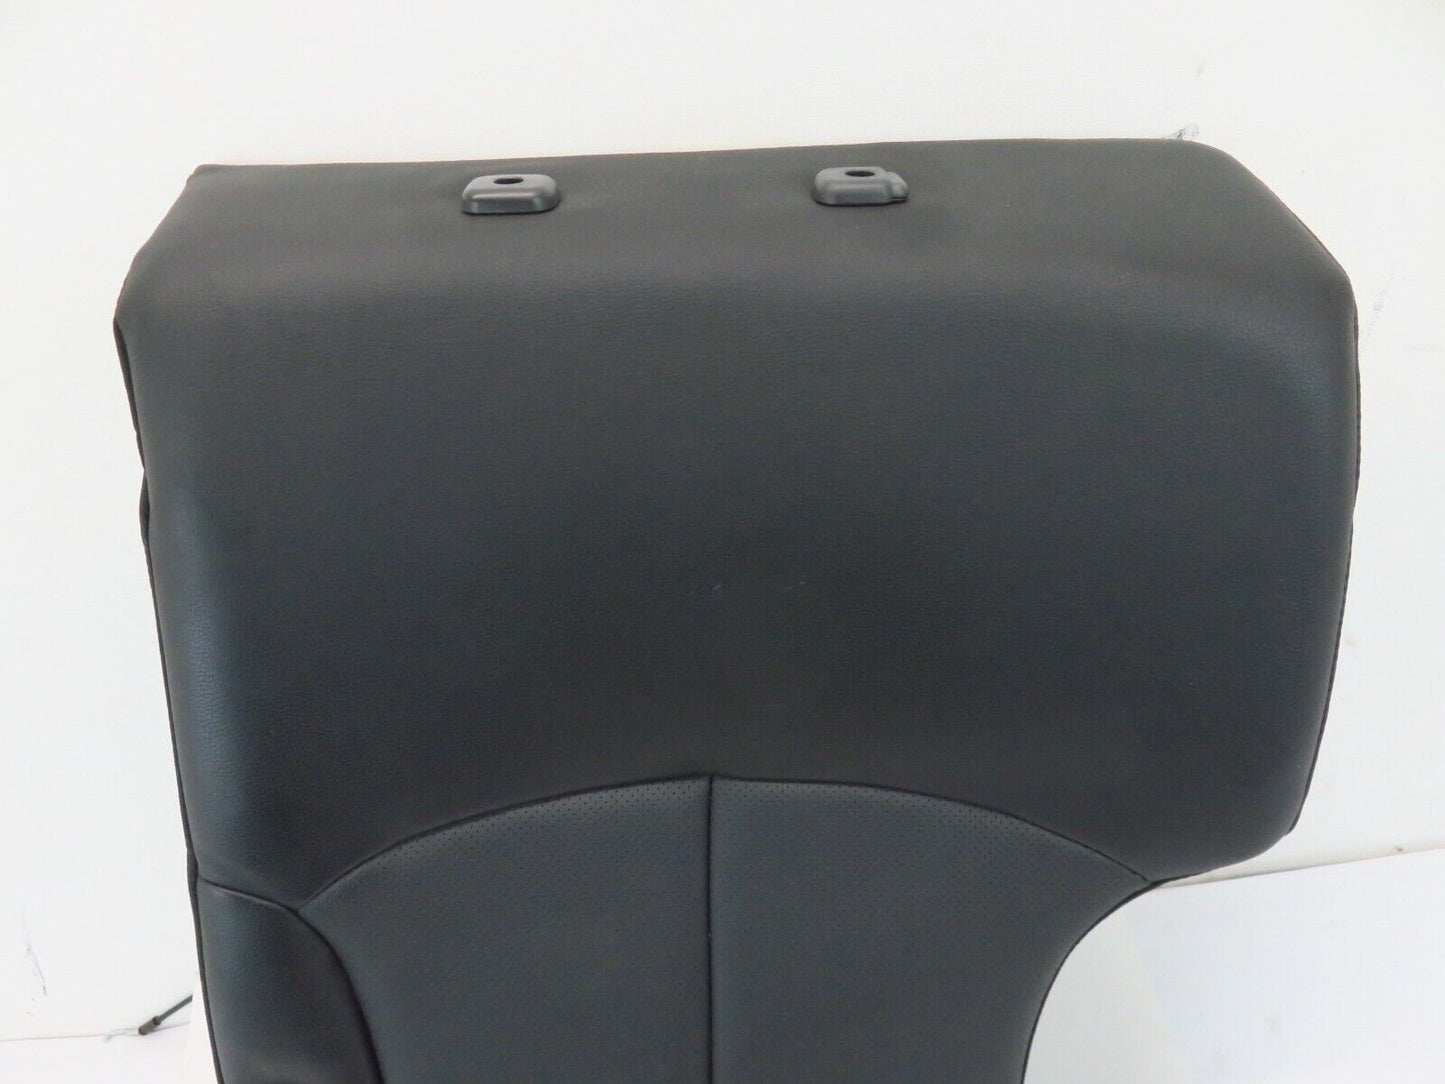 2014 Subaru Outback Rear Seat Cushion Driver LH Upper Top Leather Black 13-14